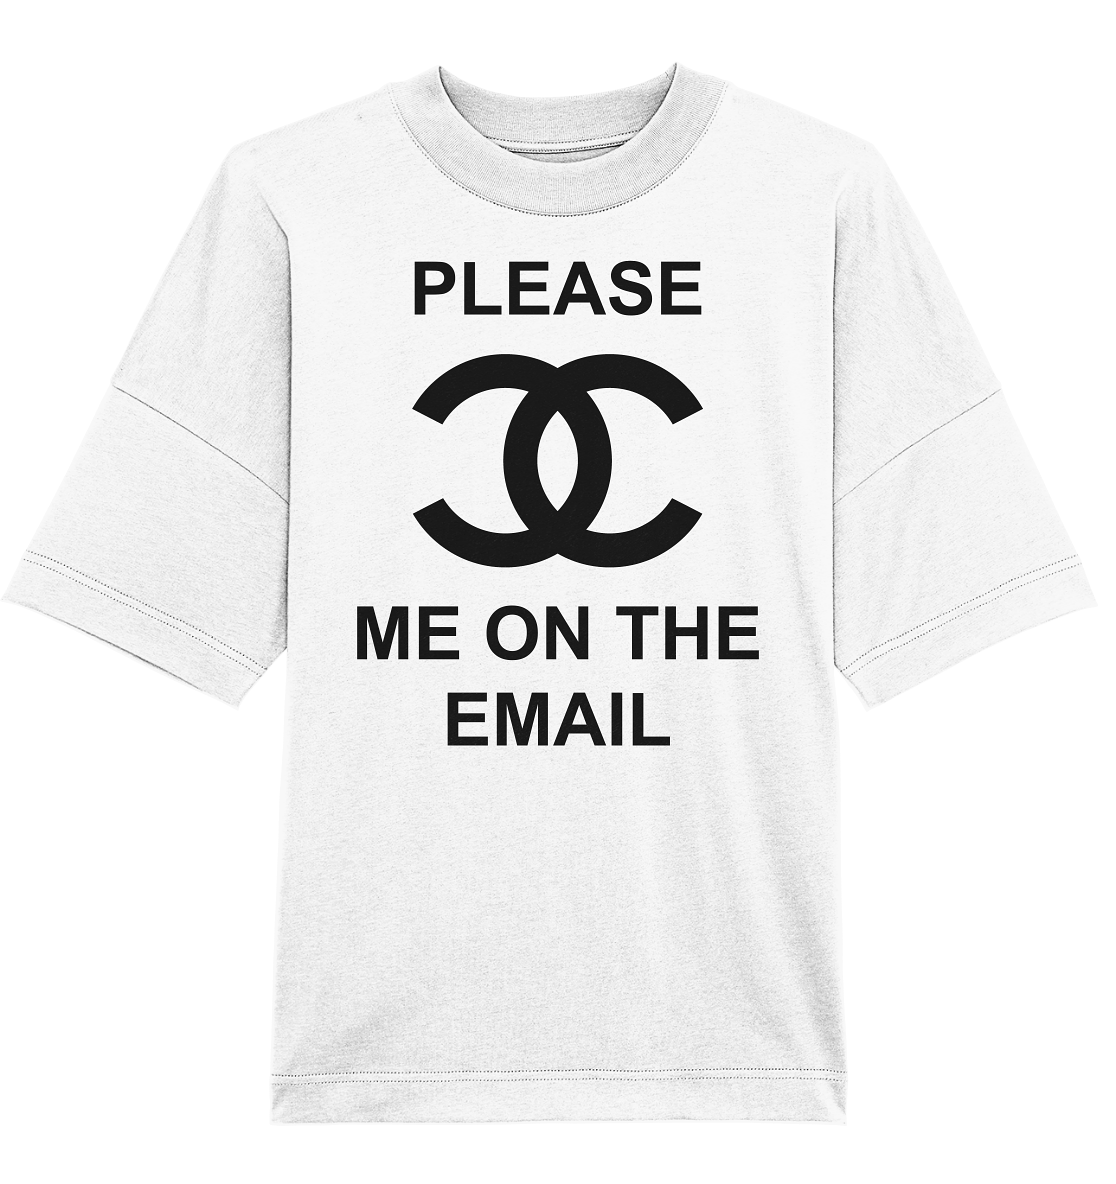 Please CC me on the Email Shirt White